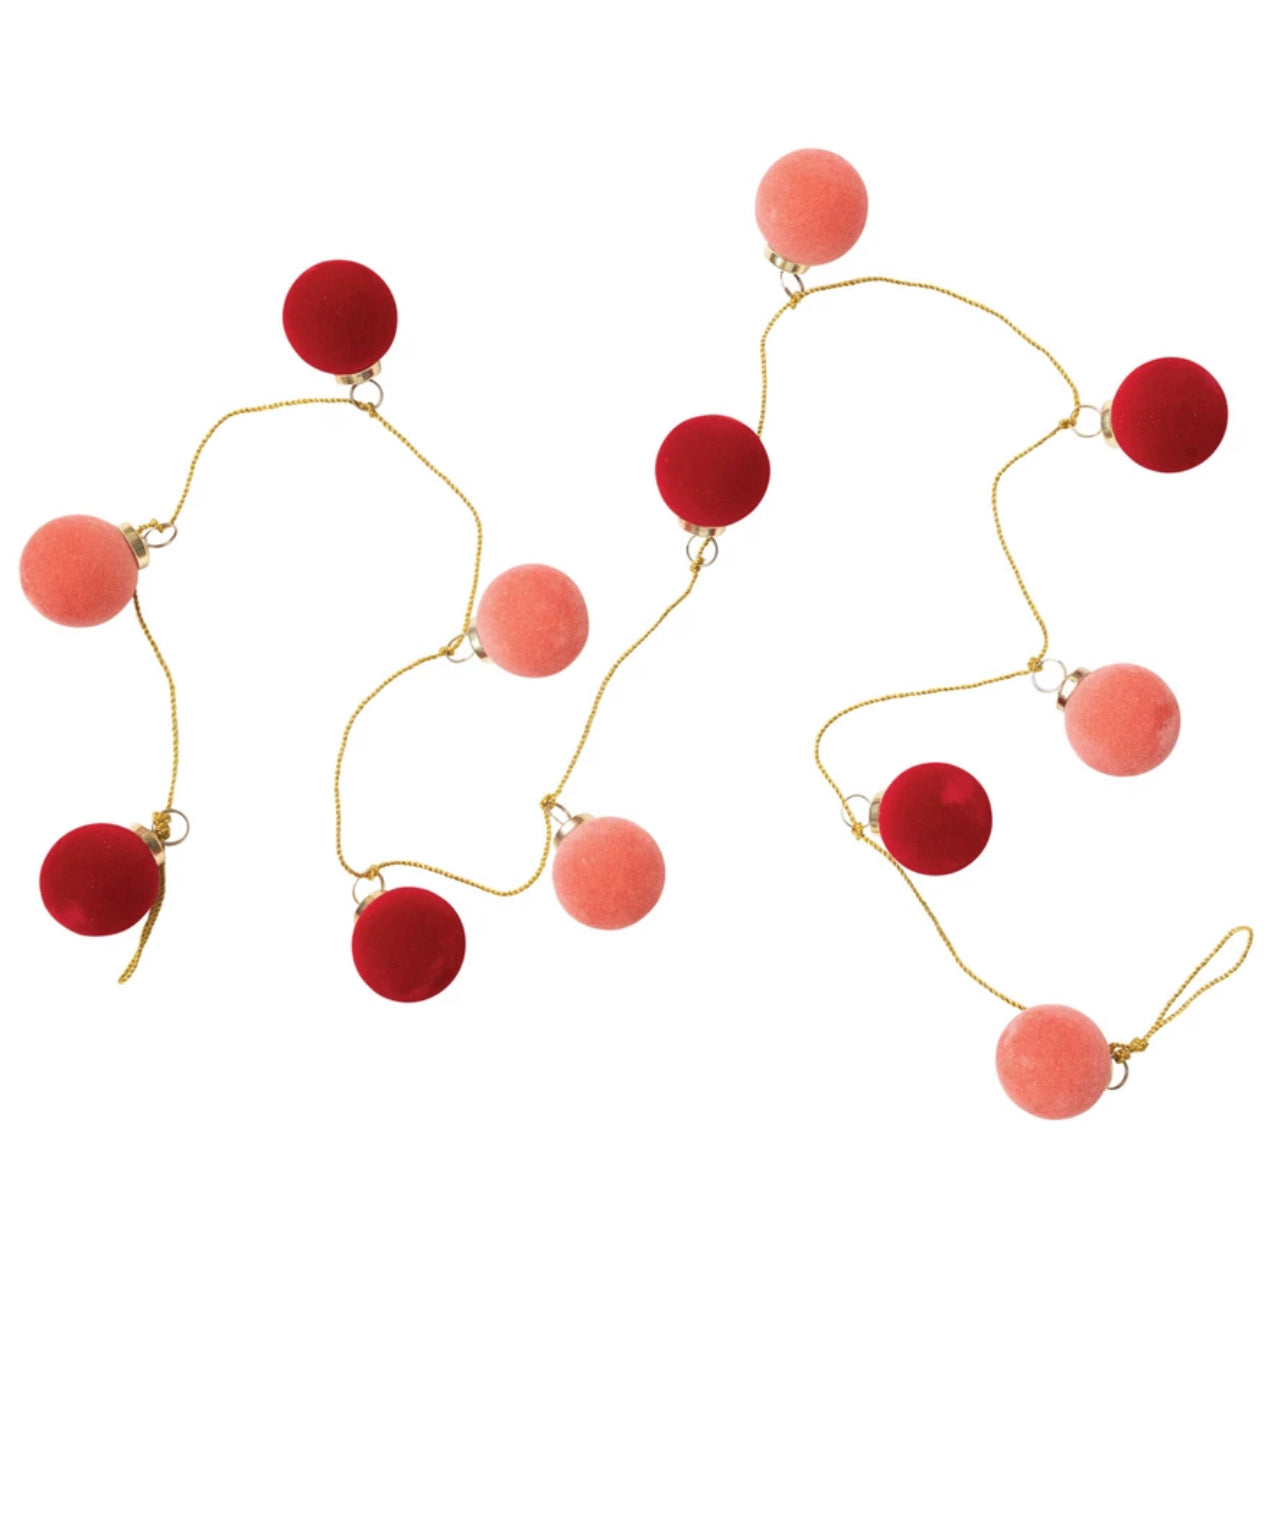 Pink and Red Flocked Ball Garland